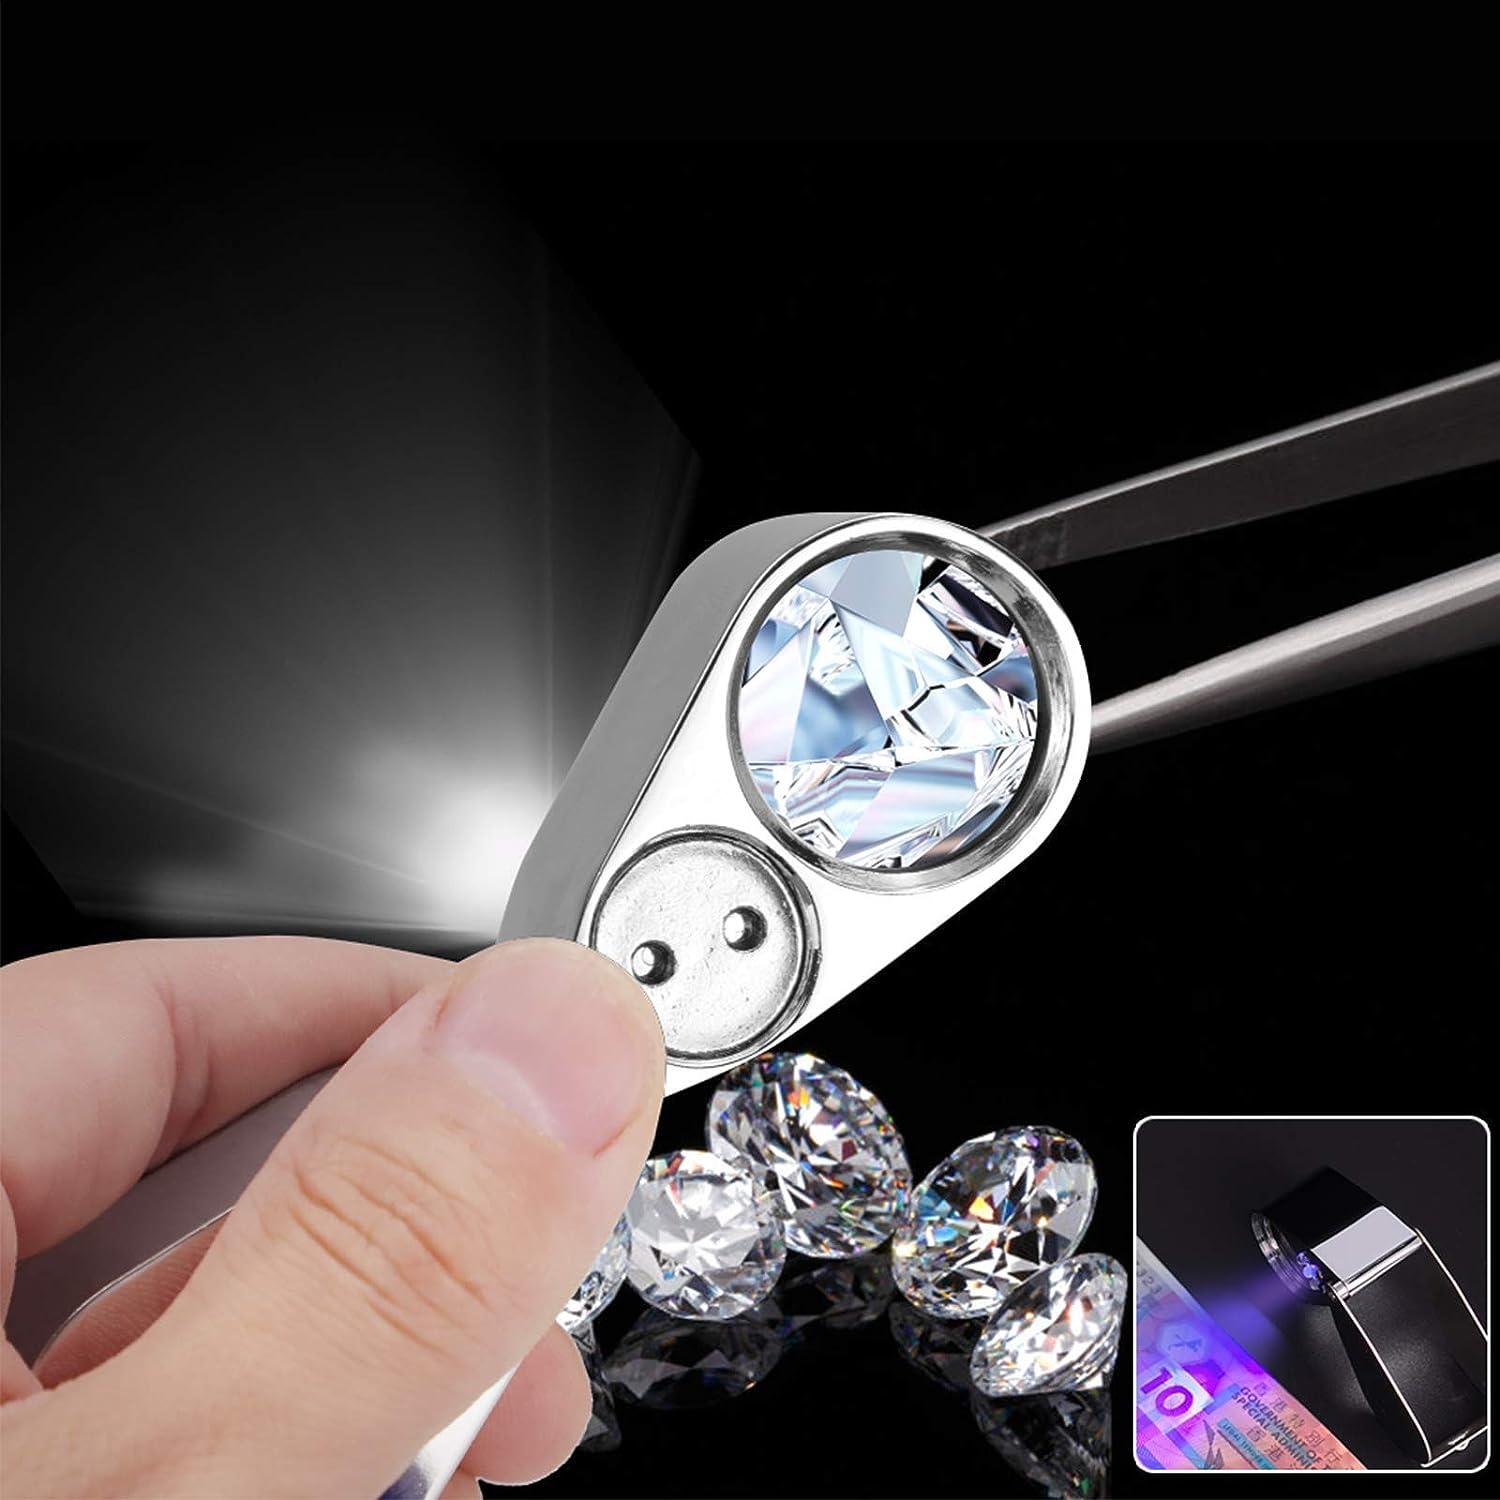 40x Illuminated Jewelry Loop Magnifier, Pocket Folding Magnifying Glass Jewelers Eye Loupe with LED and UV Light (LED Currency Detecting/Jewlers